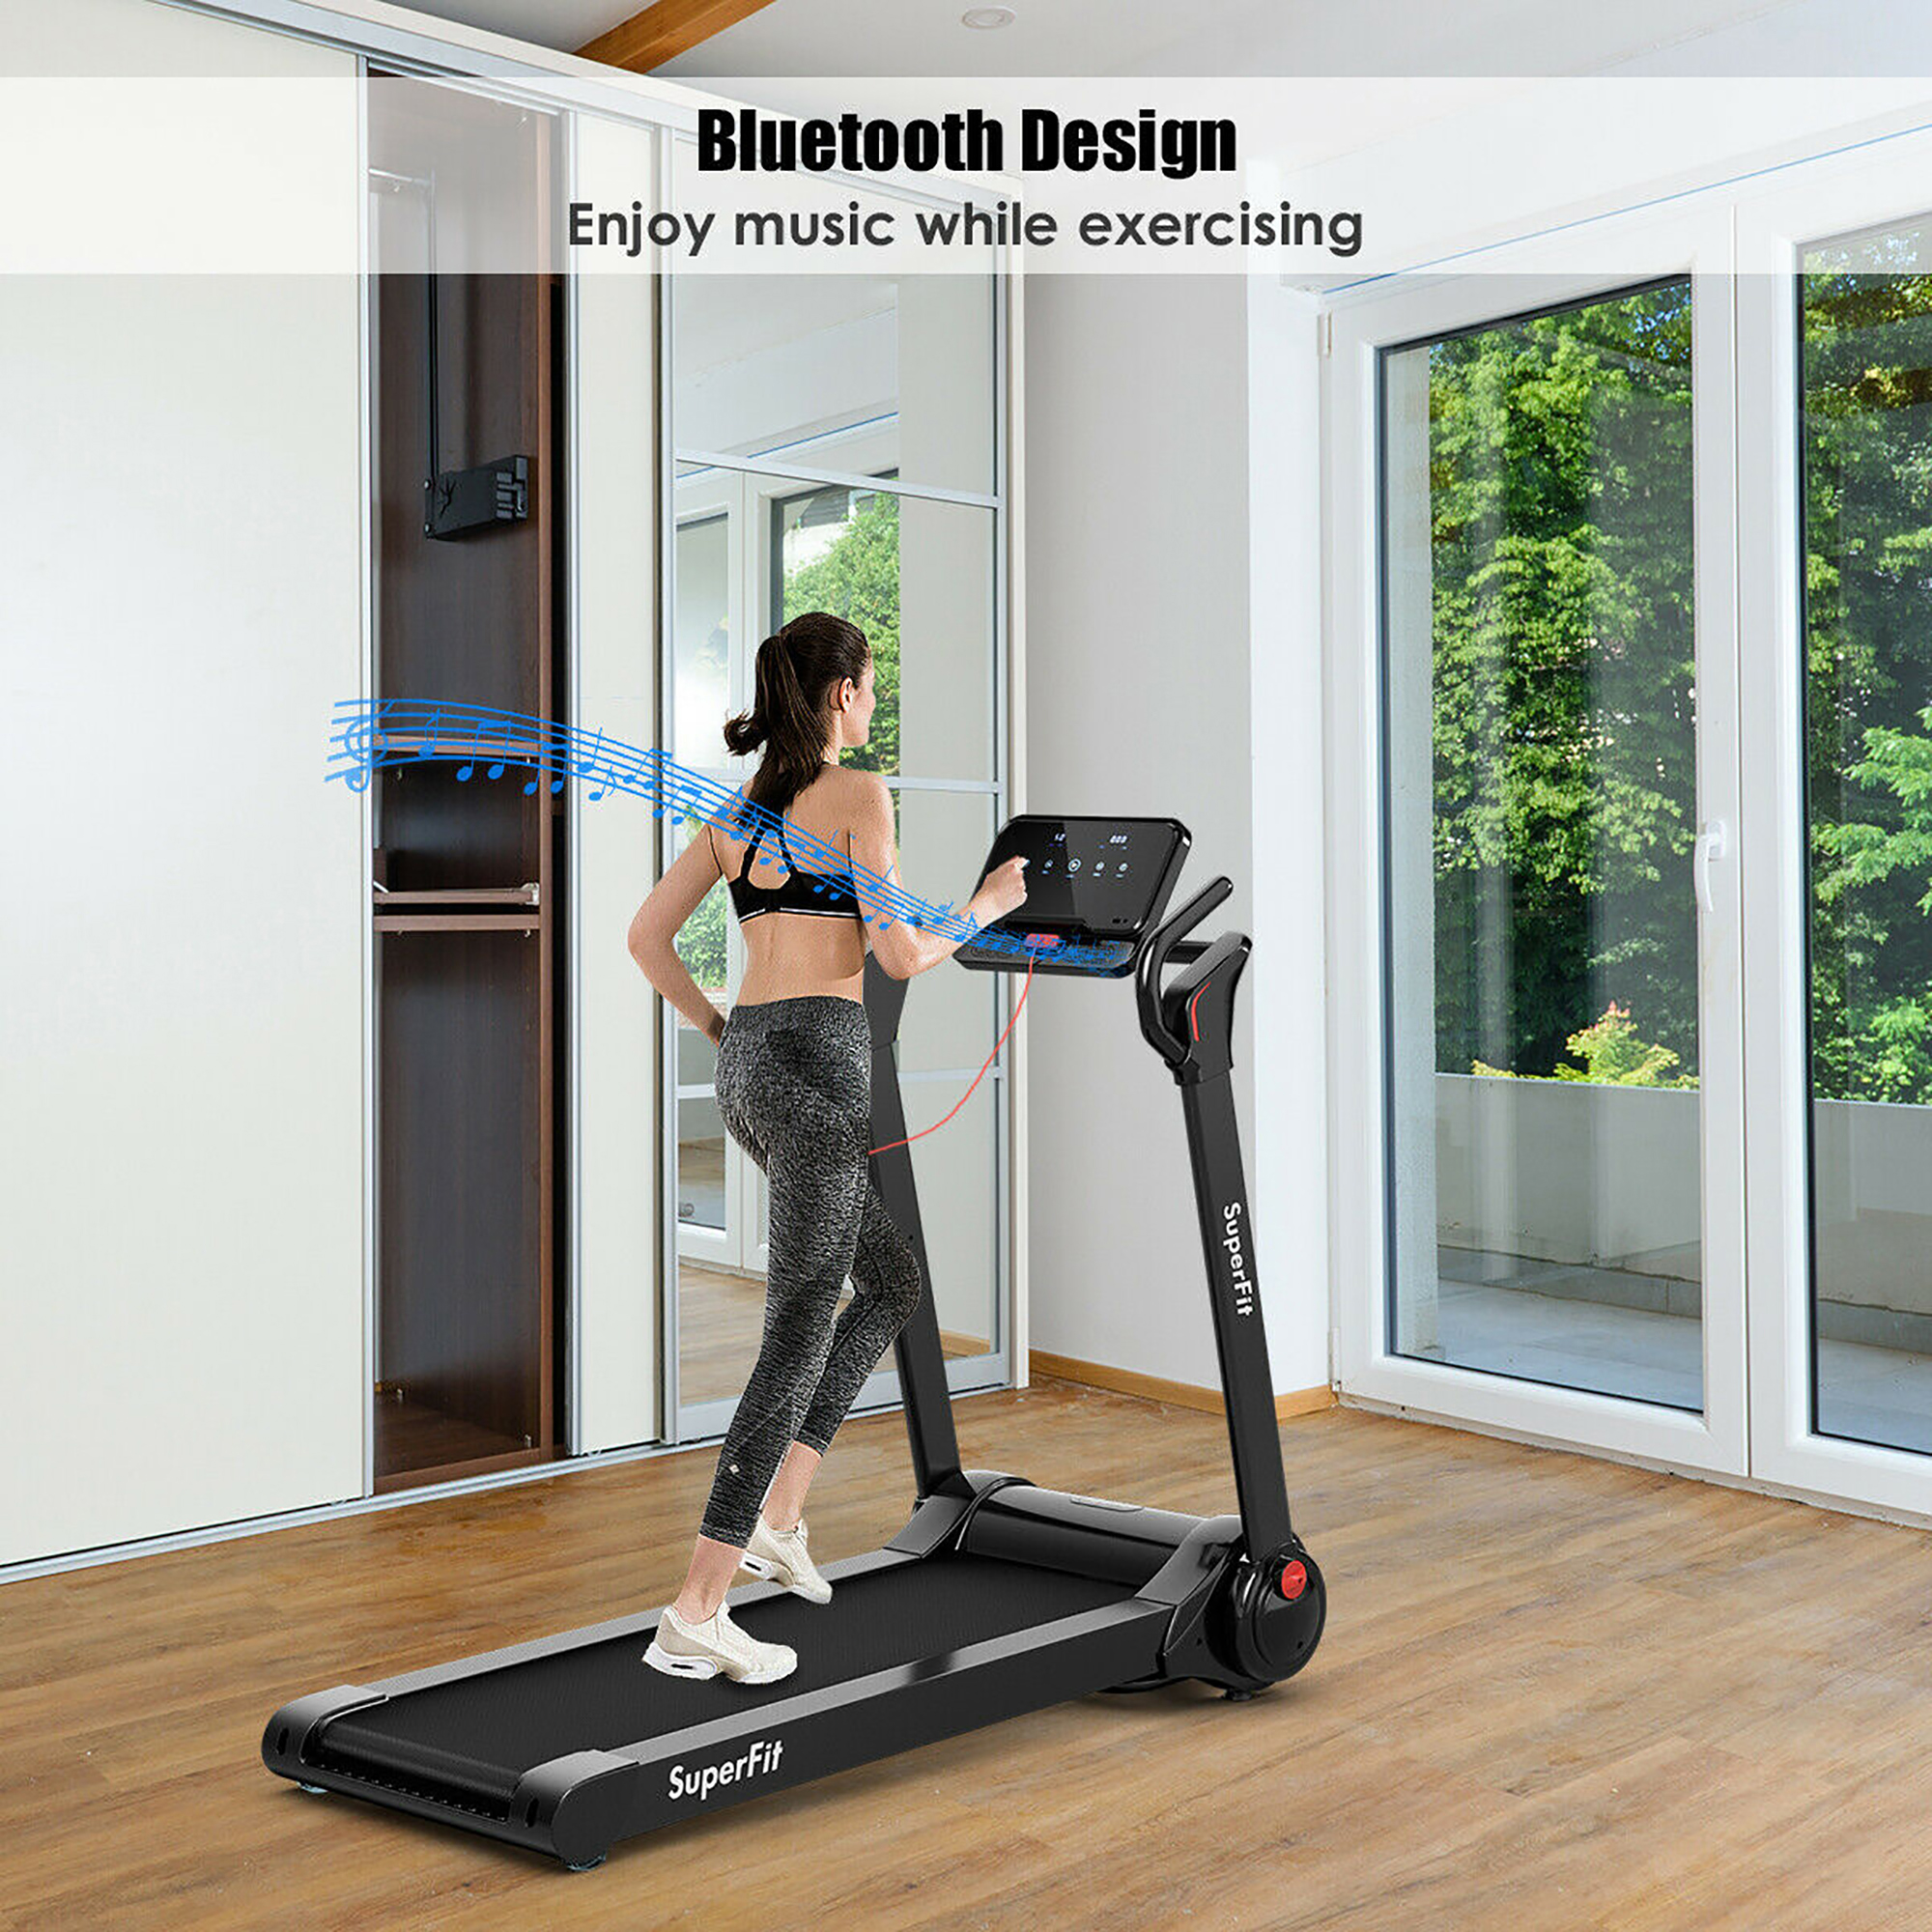 SuperFit 2.25HP Folding Electric Motorized Treadmill With Speaker - image 9 of 10